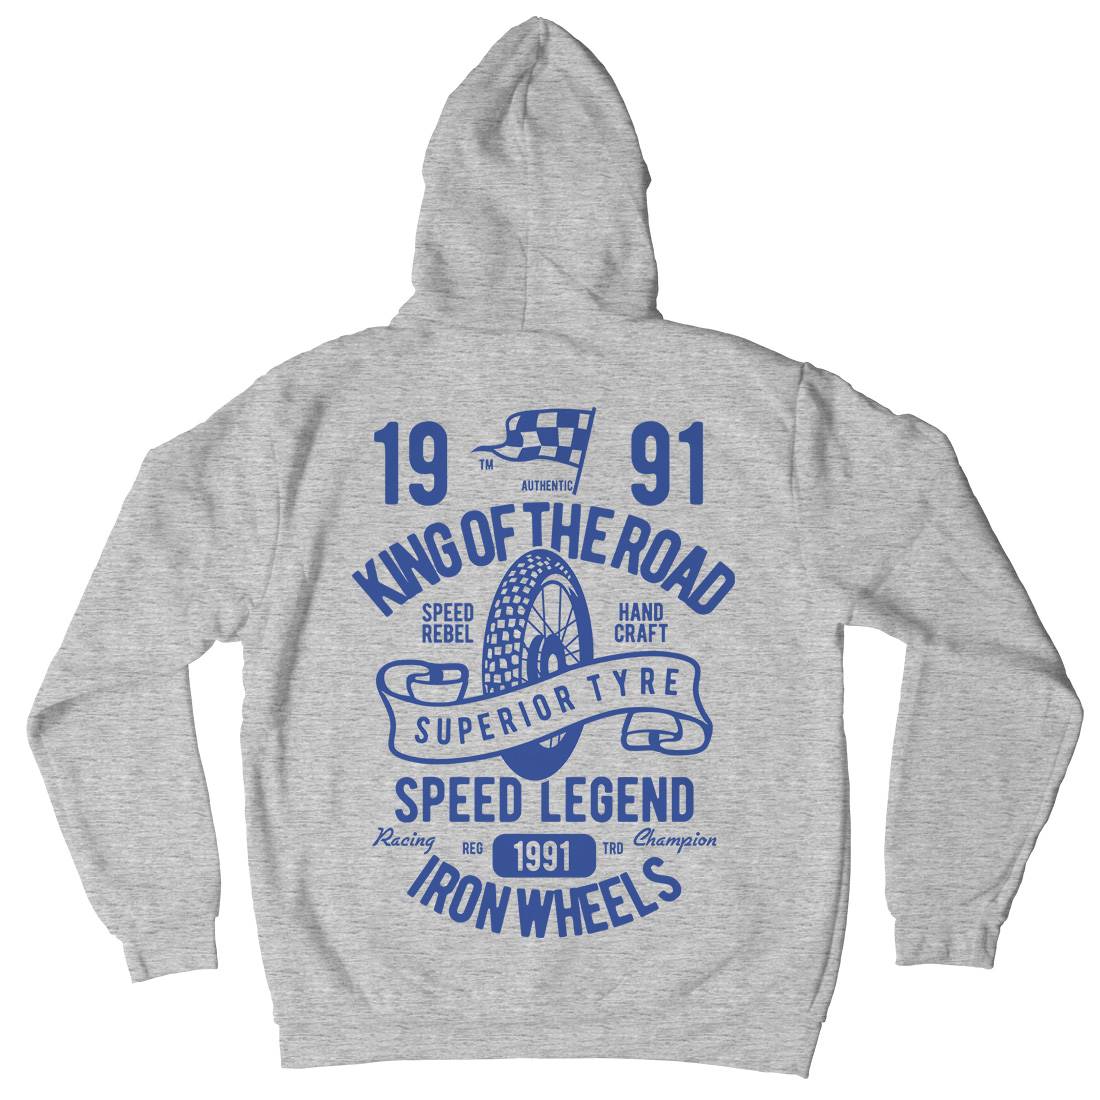 Superior Tyre King Of The Road Mens Hoodie With Pocket Motorcycles B458